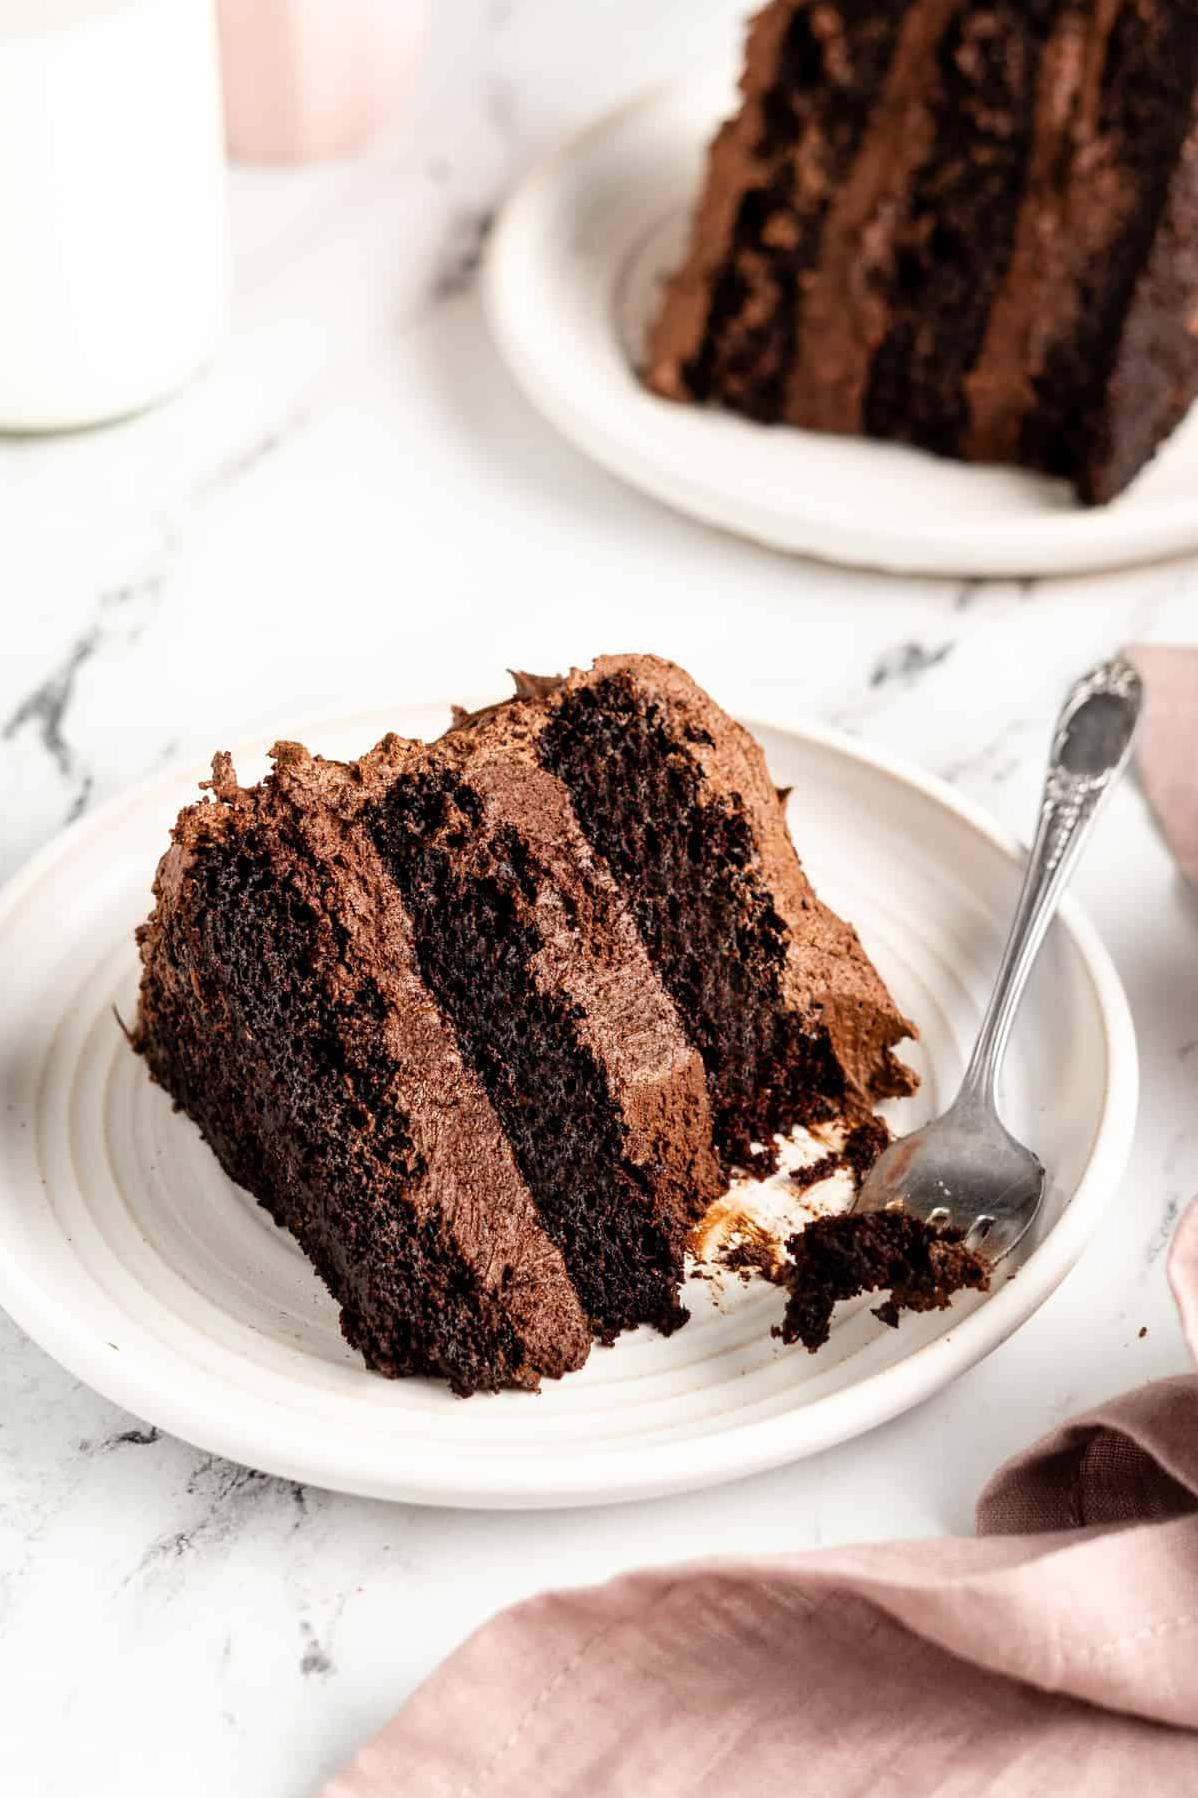  This cake is all about indulging without the guilt.